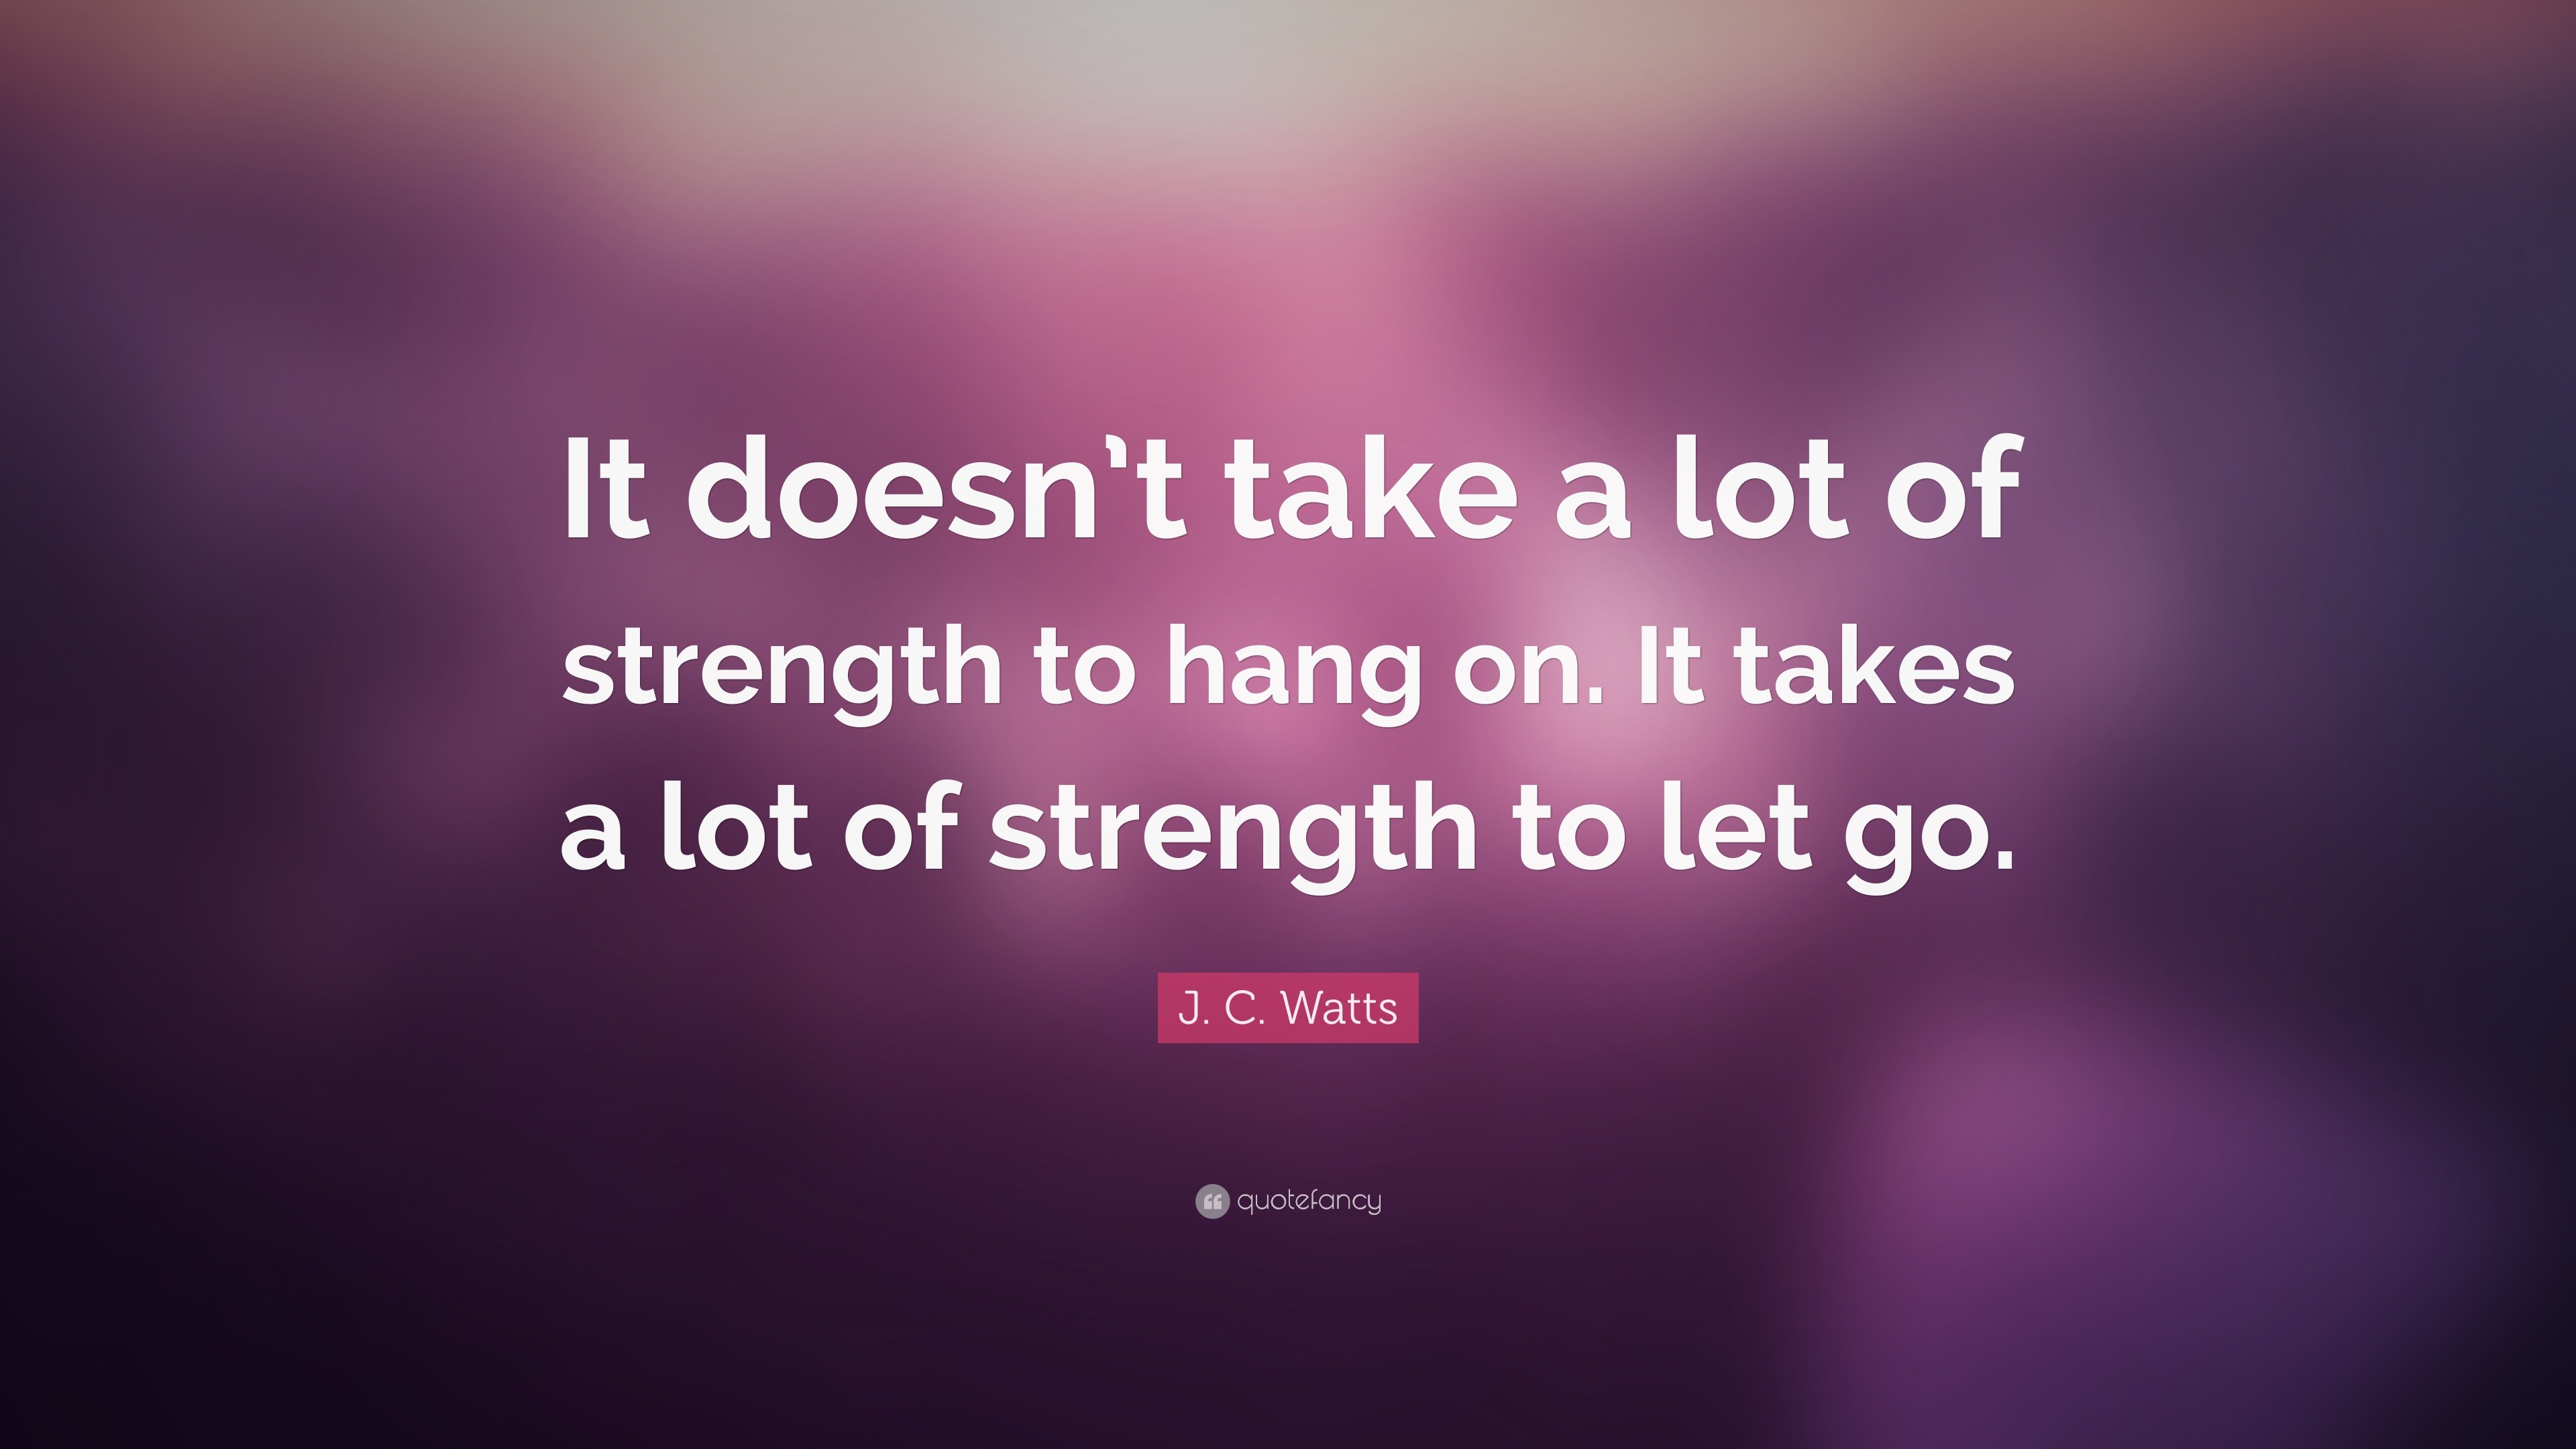 J. C. Watts Quote: "It doesn't take a lot of strength to ...